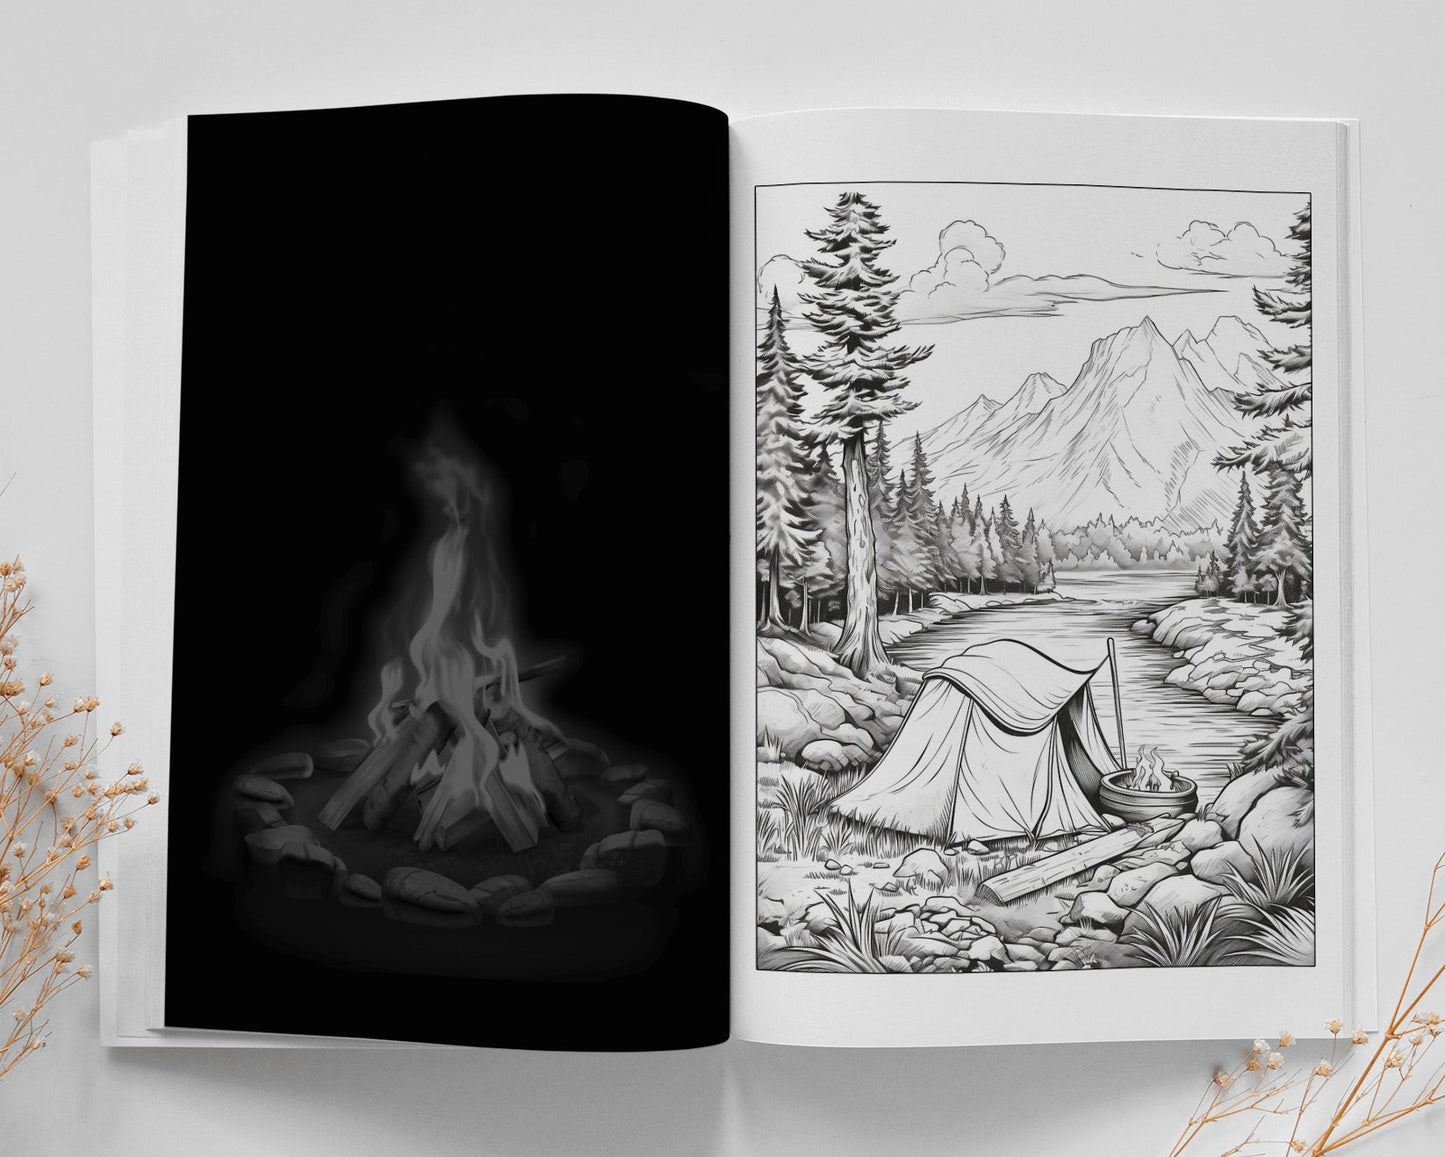 Camping Adventures Coloring Book Grayscale (Printbook) - Monsoon Publishing USA